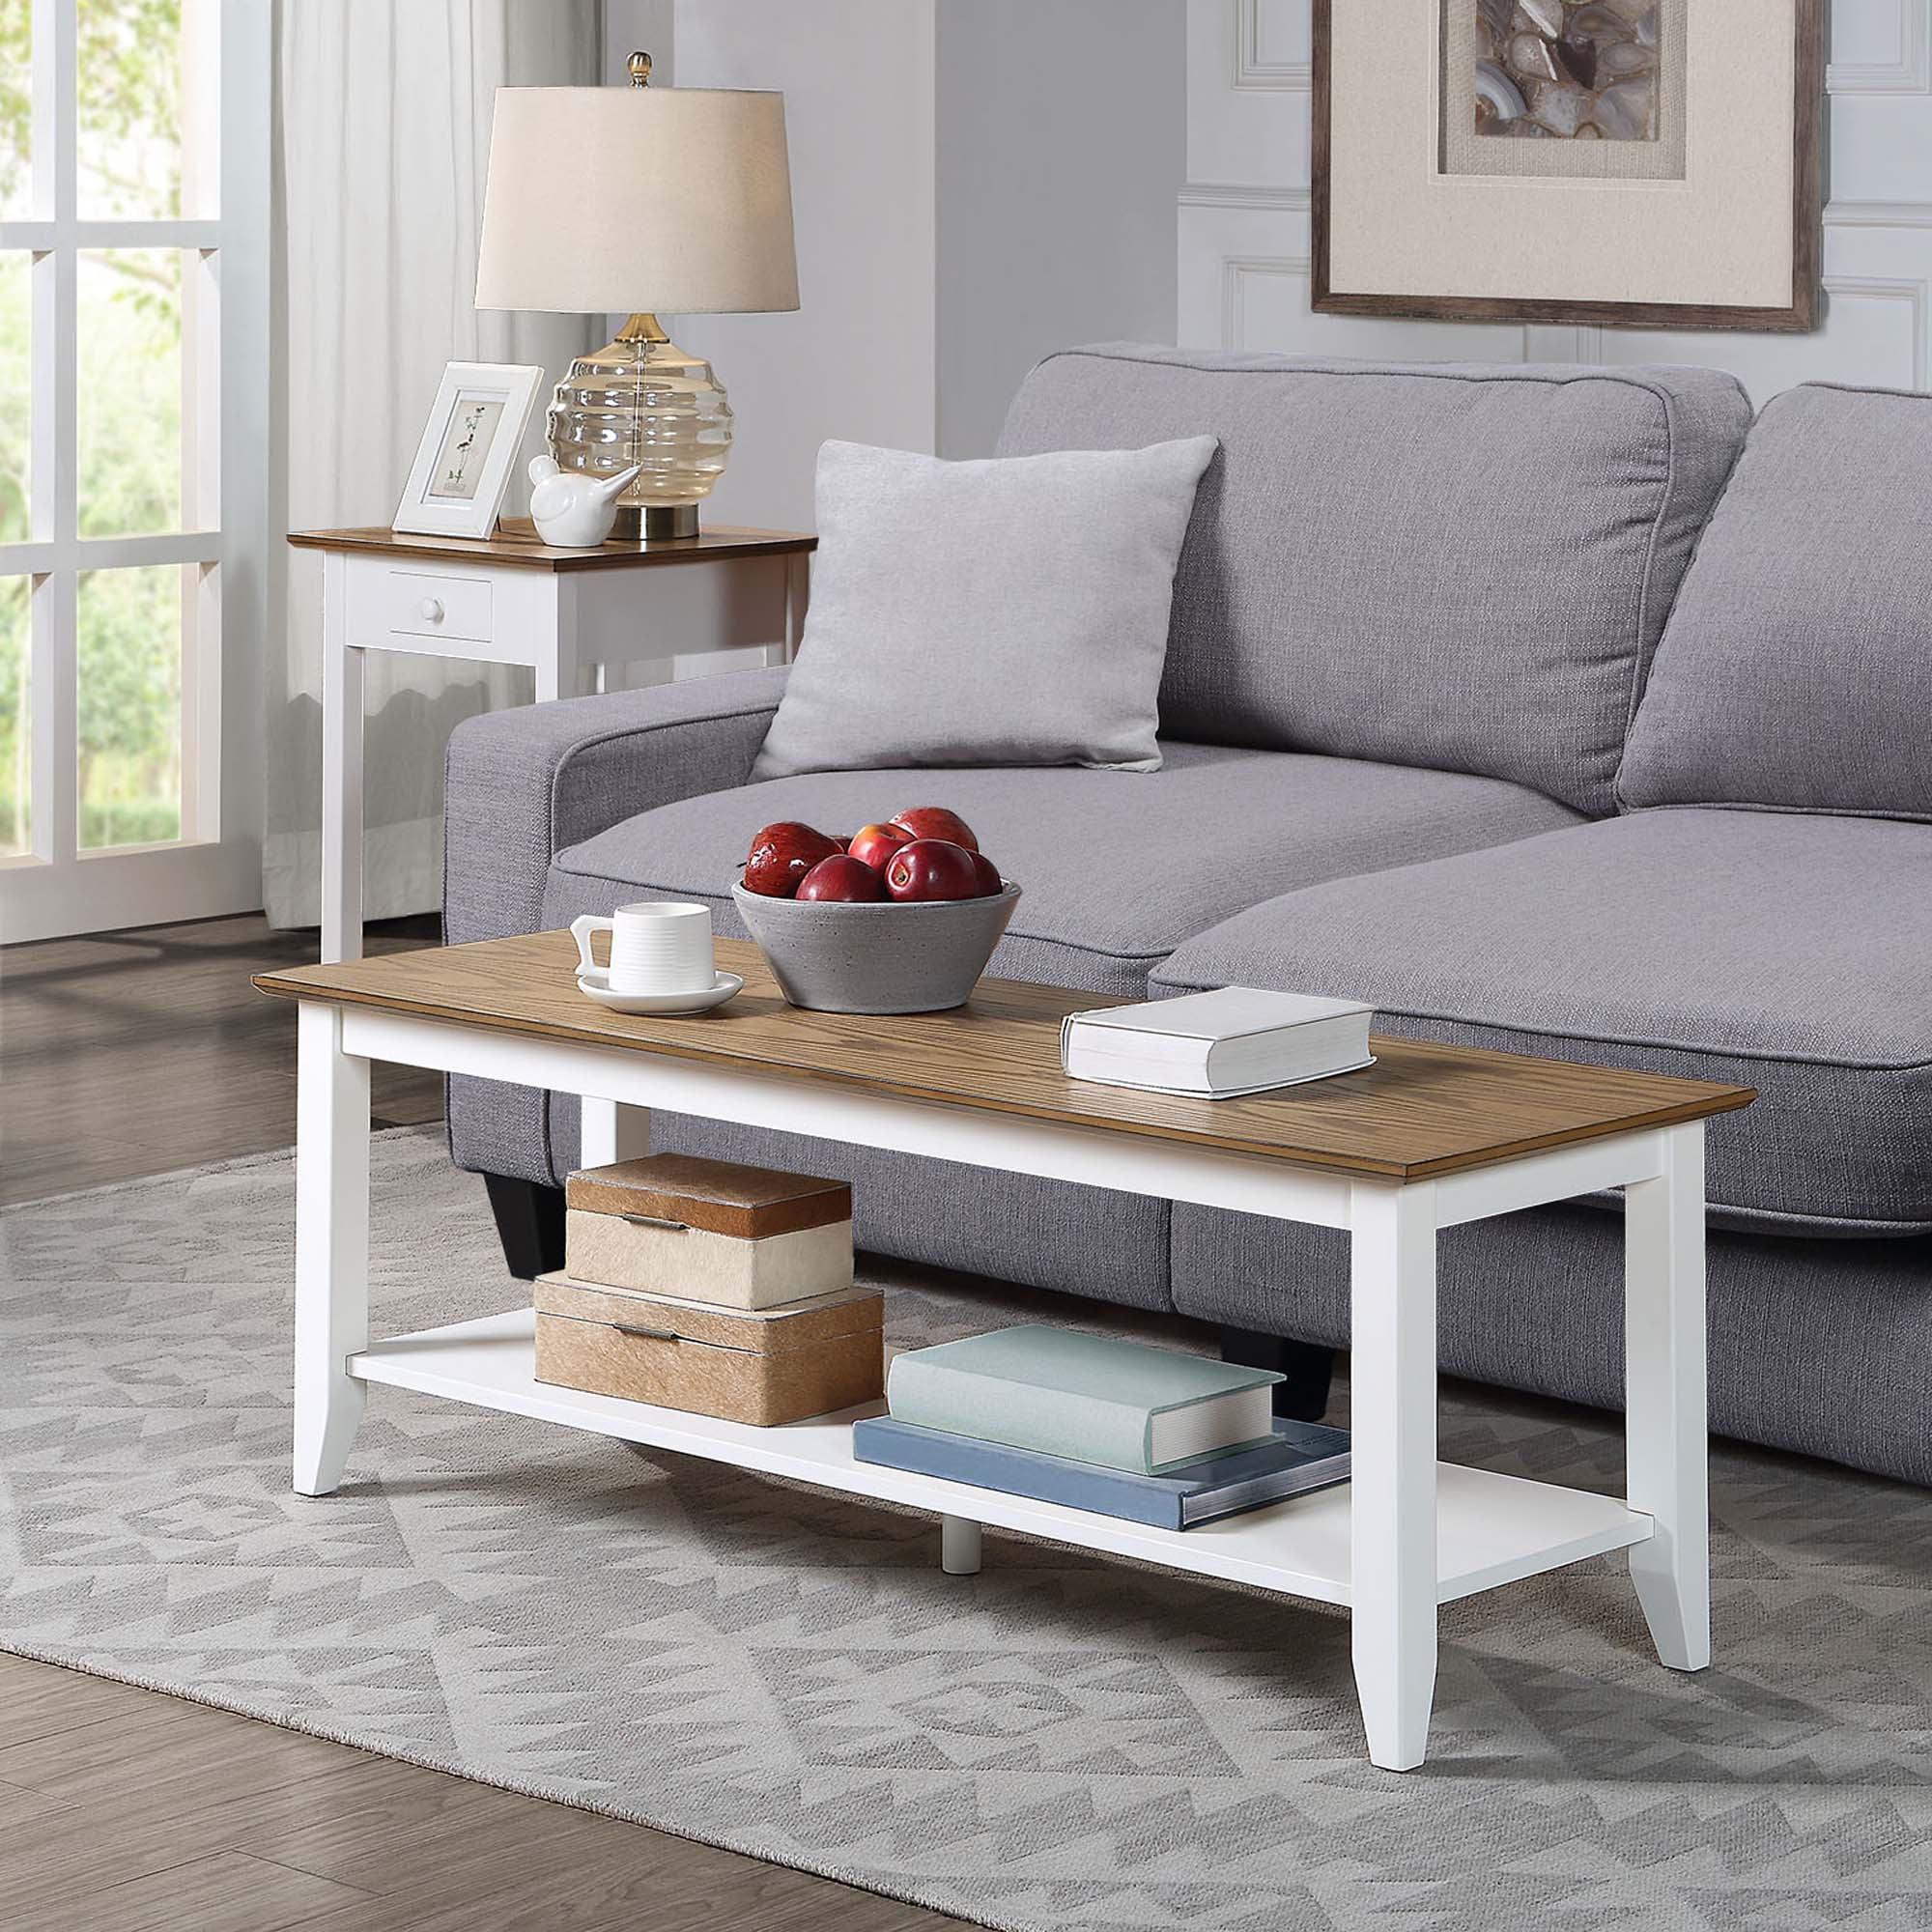 Heritage Driftwood & White Rectangular Coffee Table with Shelf